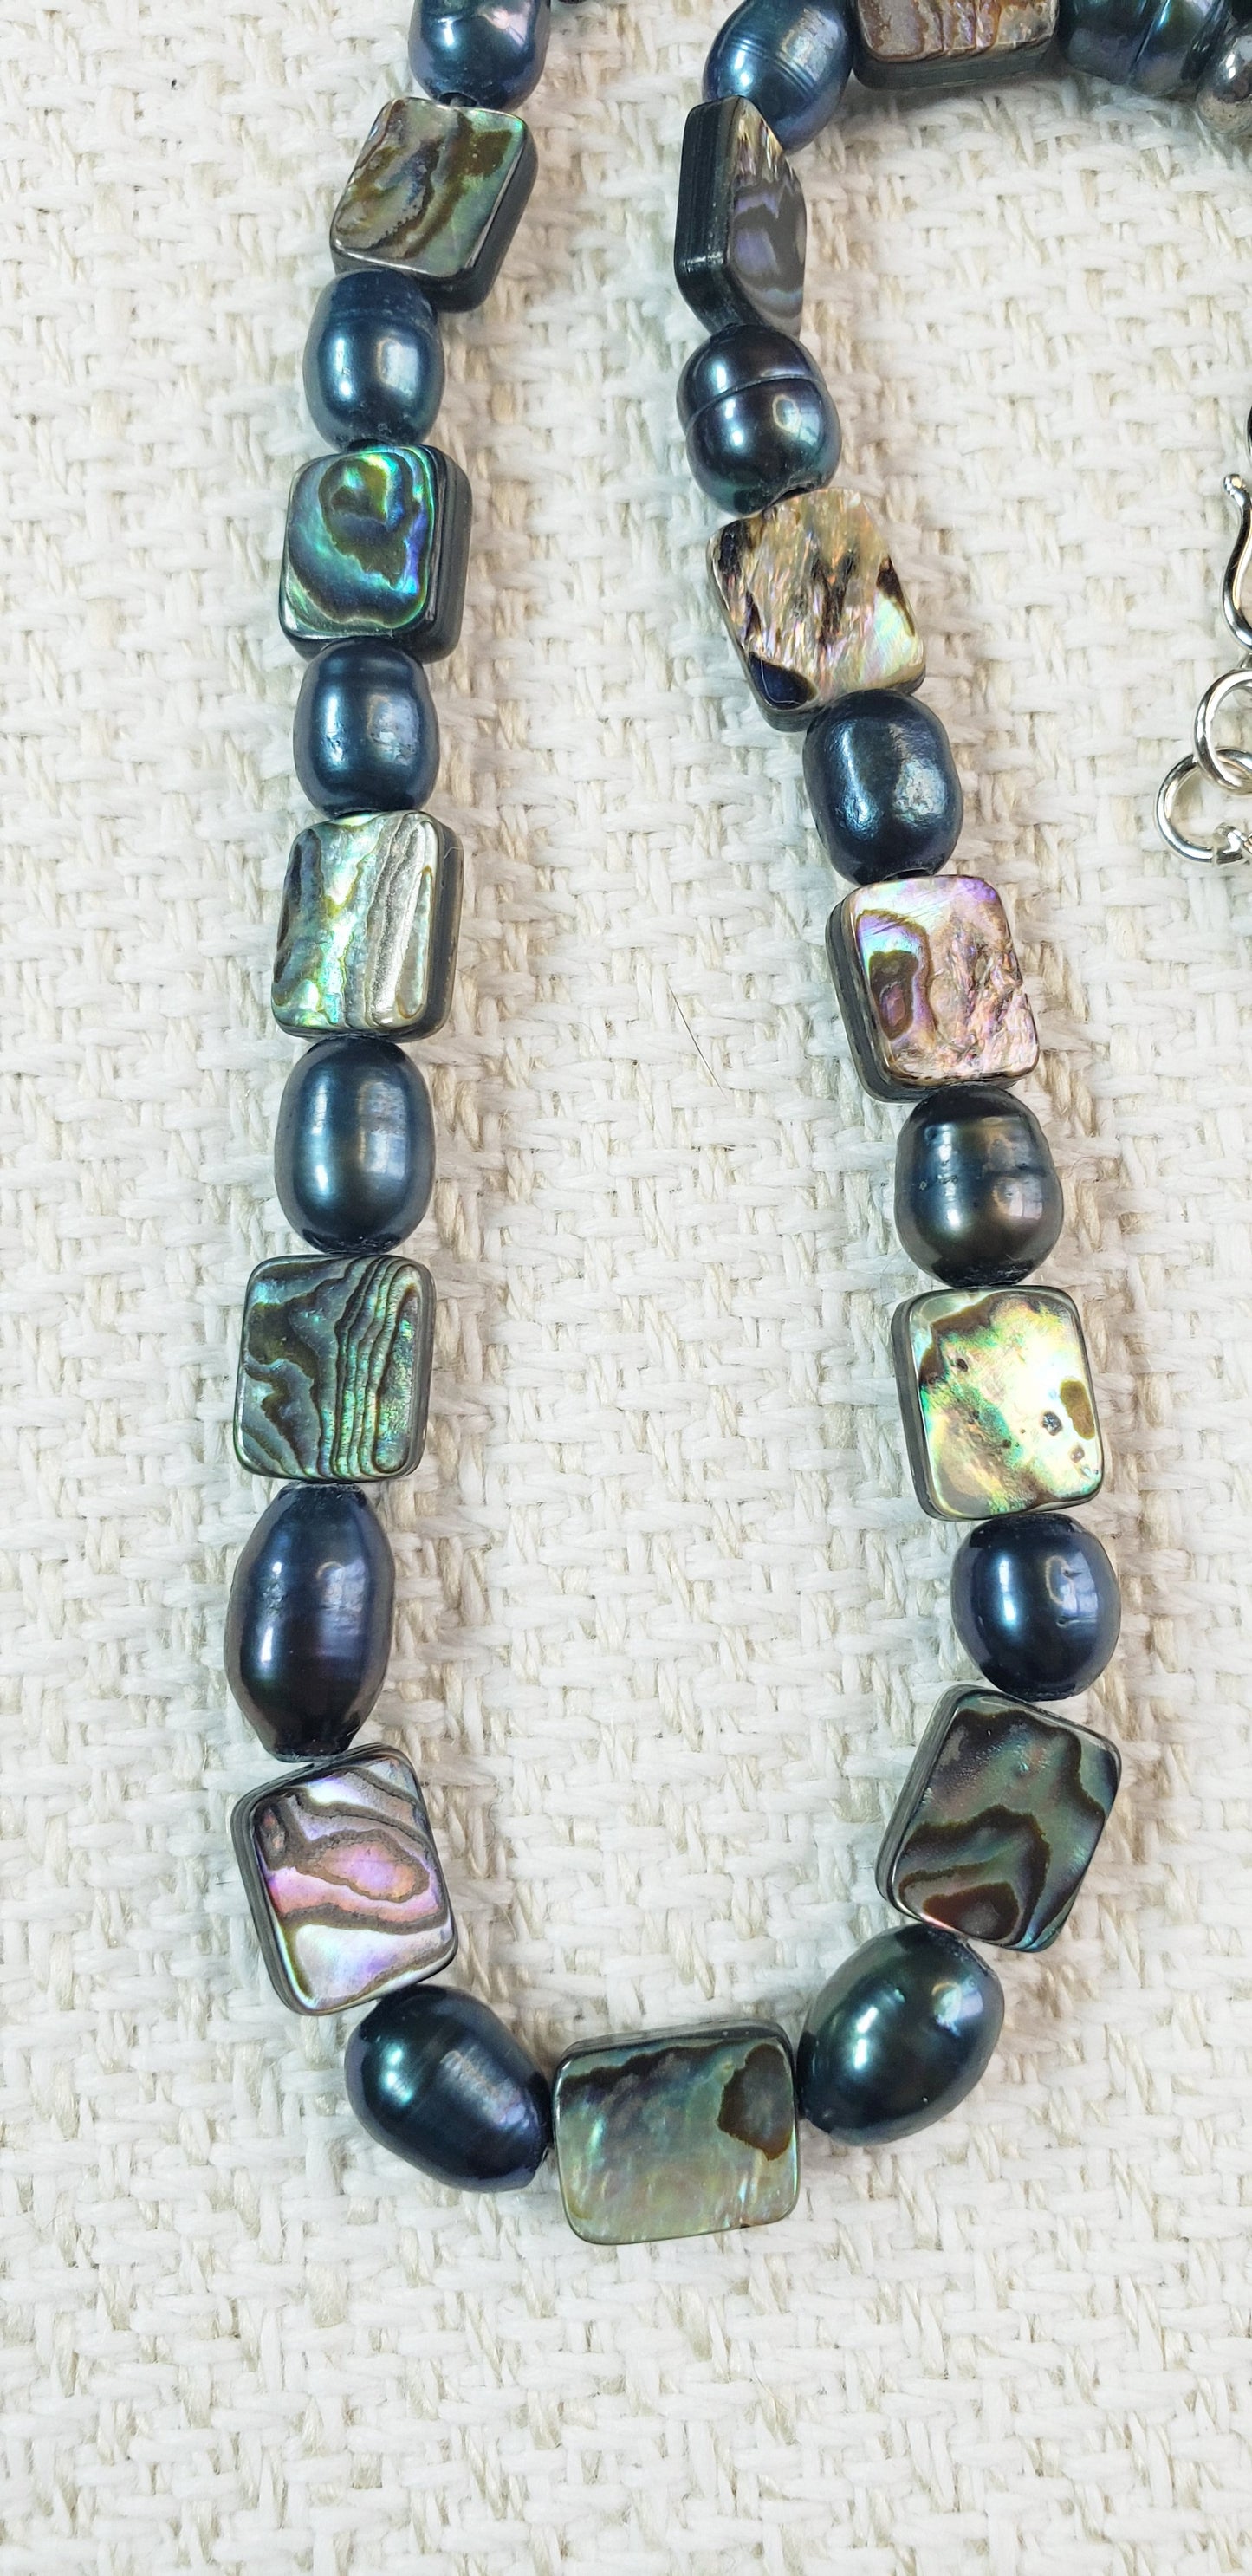 Abalone Mother of Pearl & Cultured Black Pearl Necklace